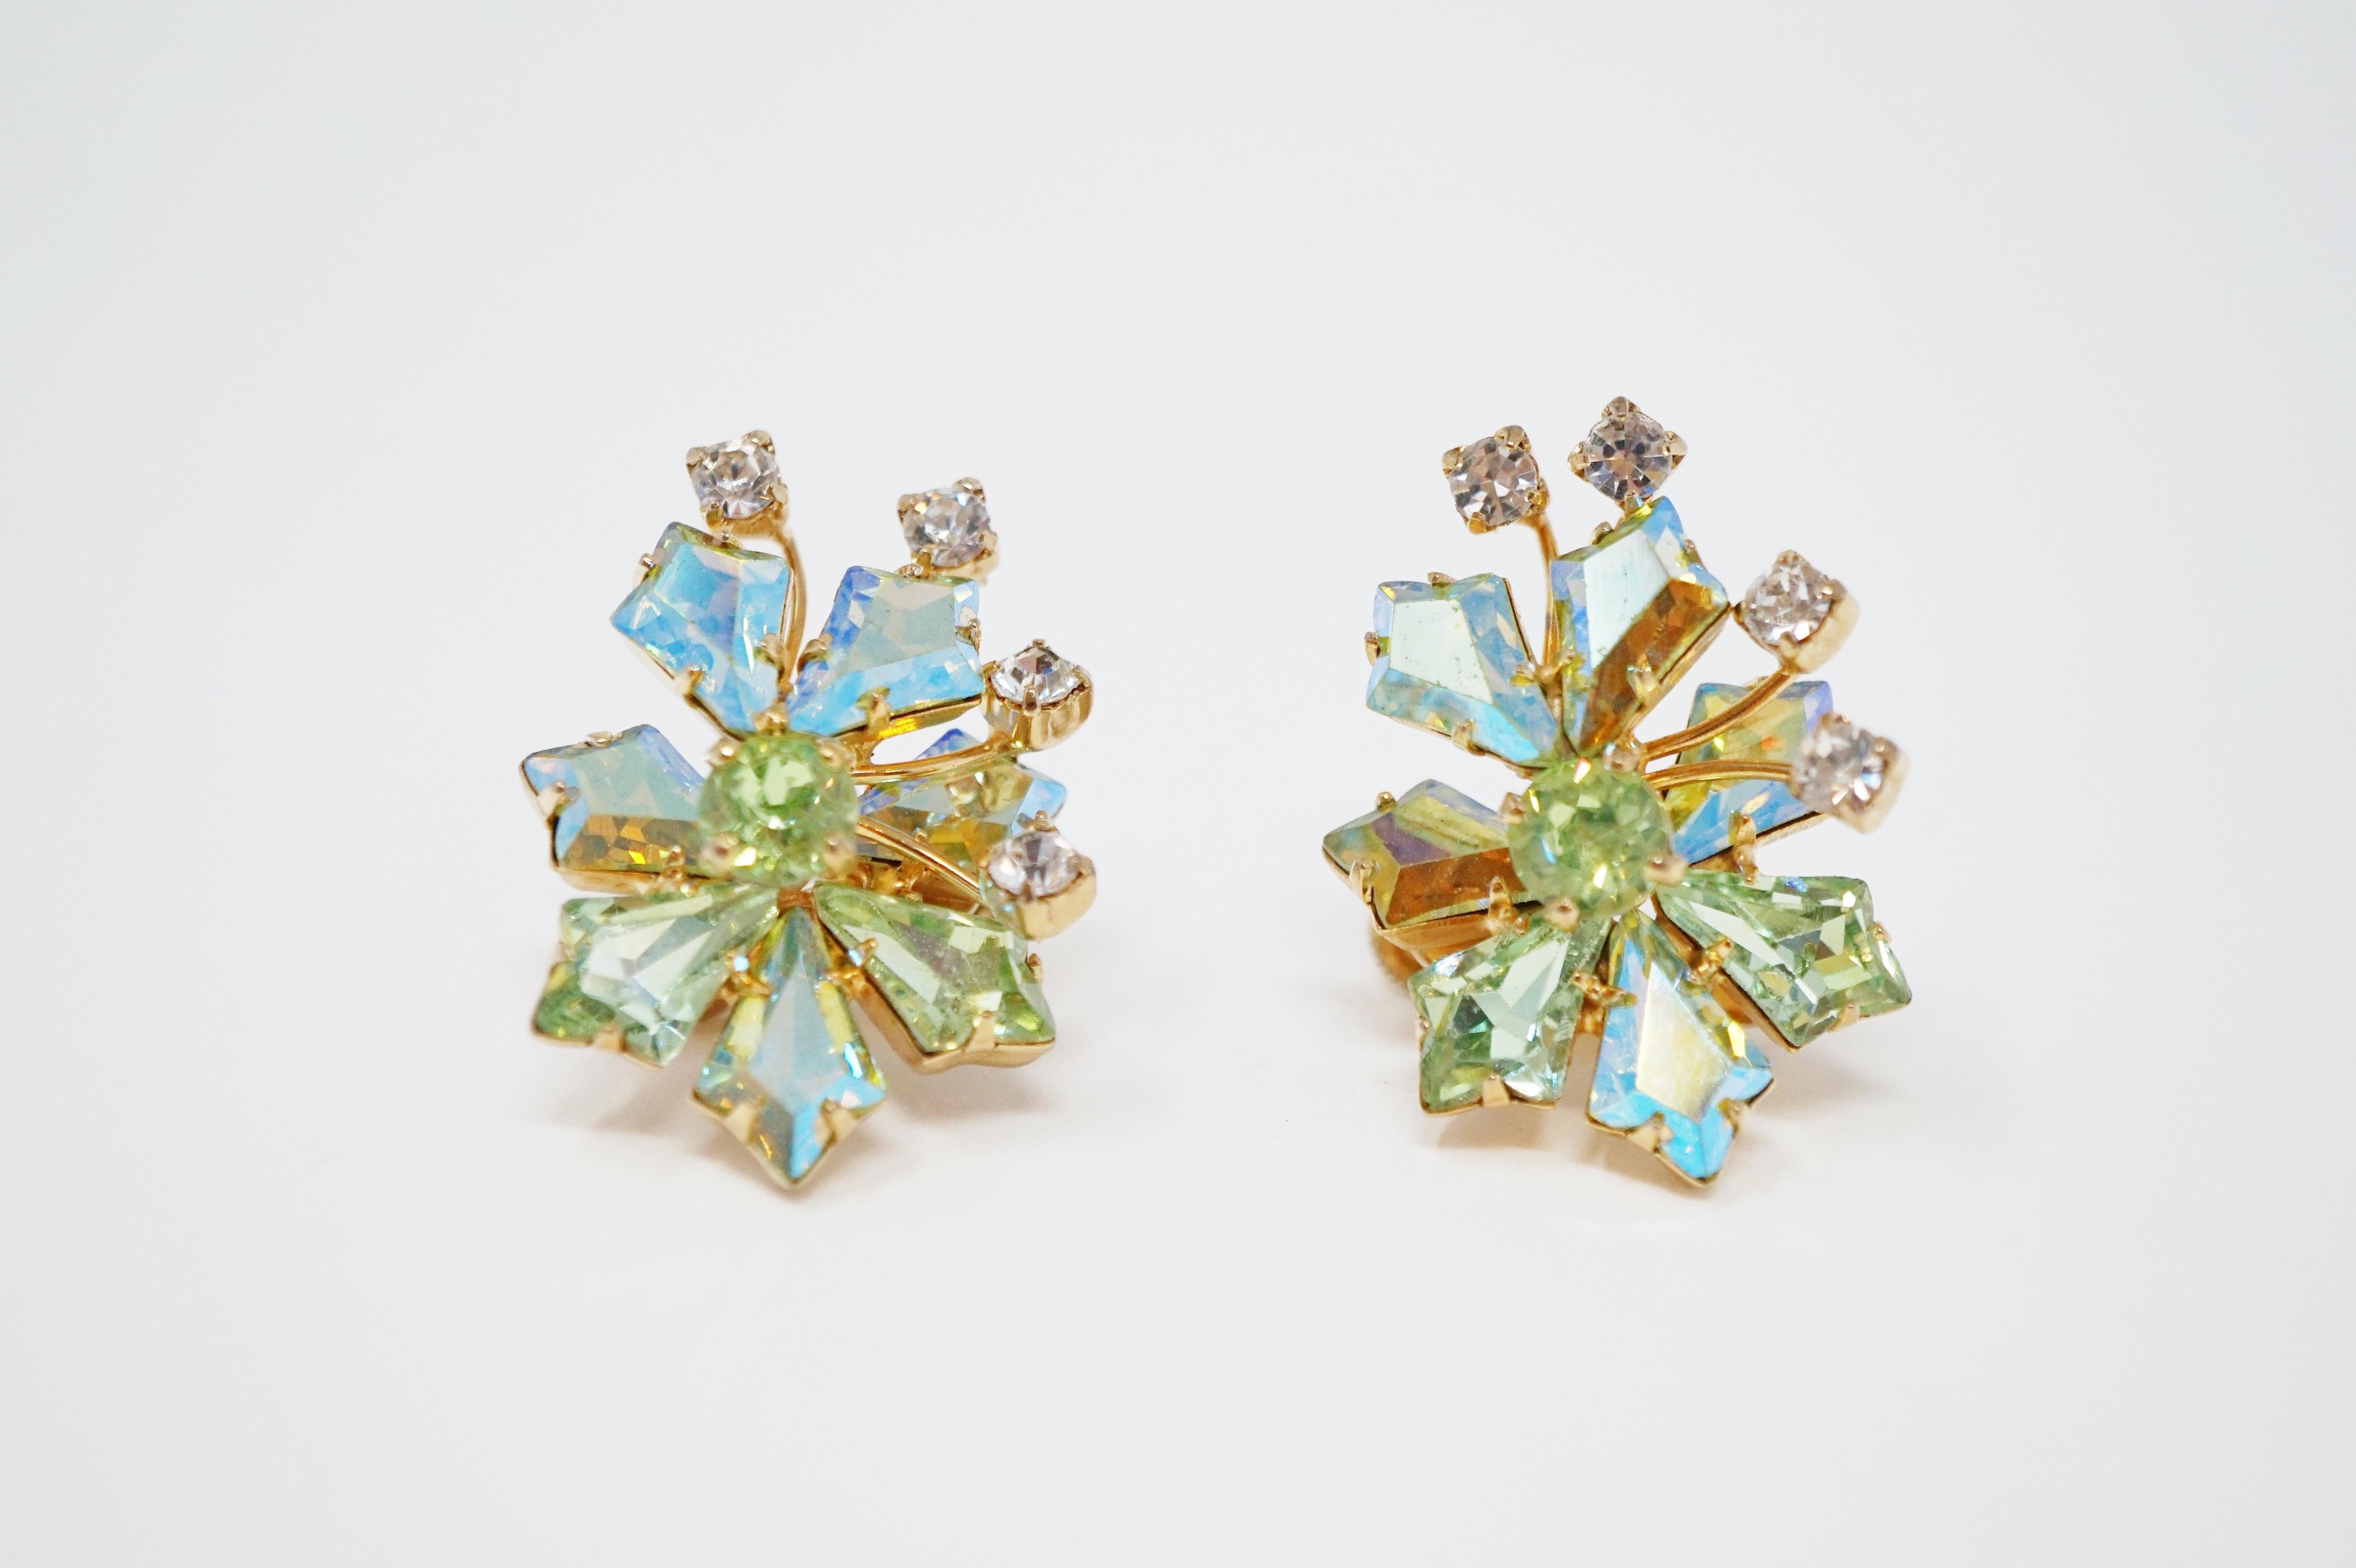 These truly stunning Vendome rhinestone clip-on earrings are a wonderful way to add a touch of sparkle to your look!  Vendome is a collectible and coveted vintage costume jewelry brand that is known for their use of unusual rhinestones, as seen in